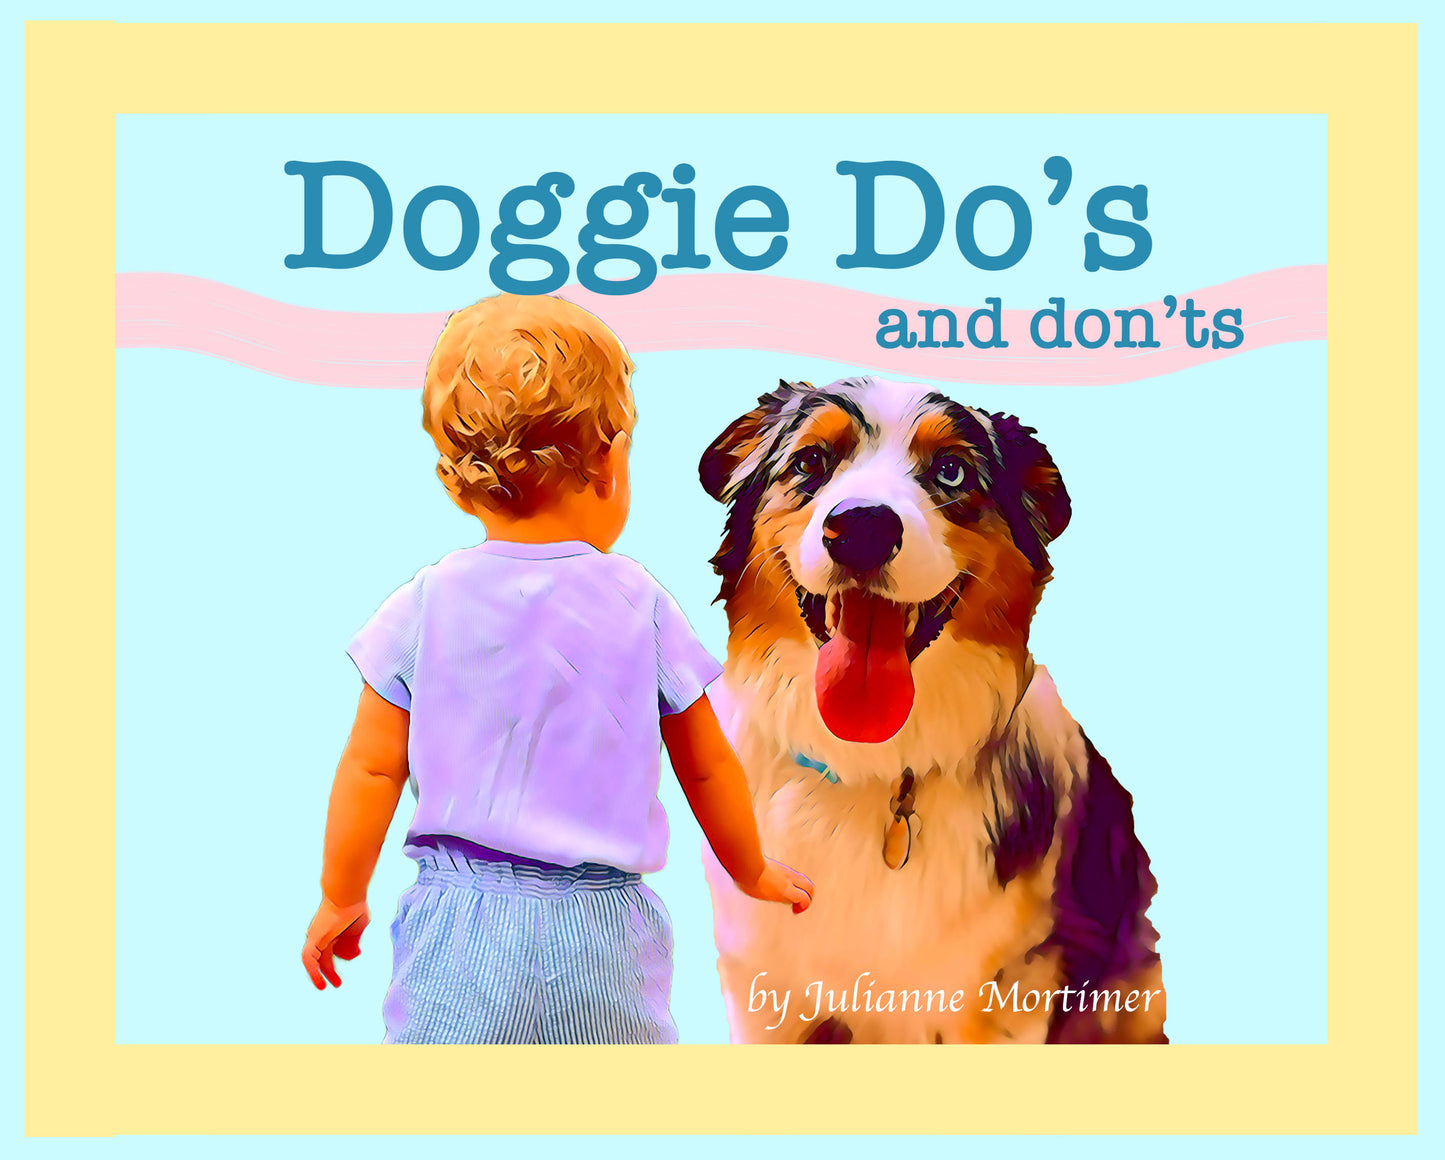 Doggie Do's and Don'ts